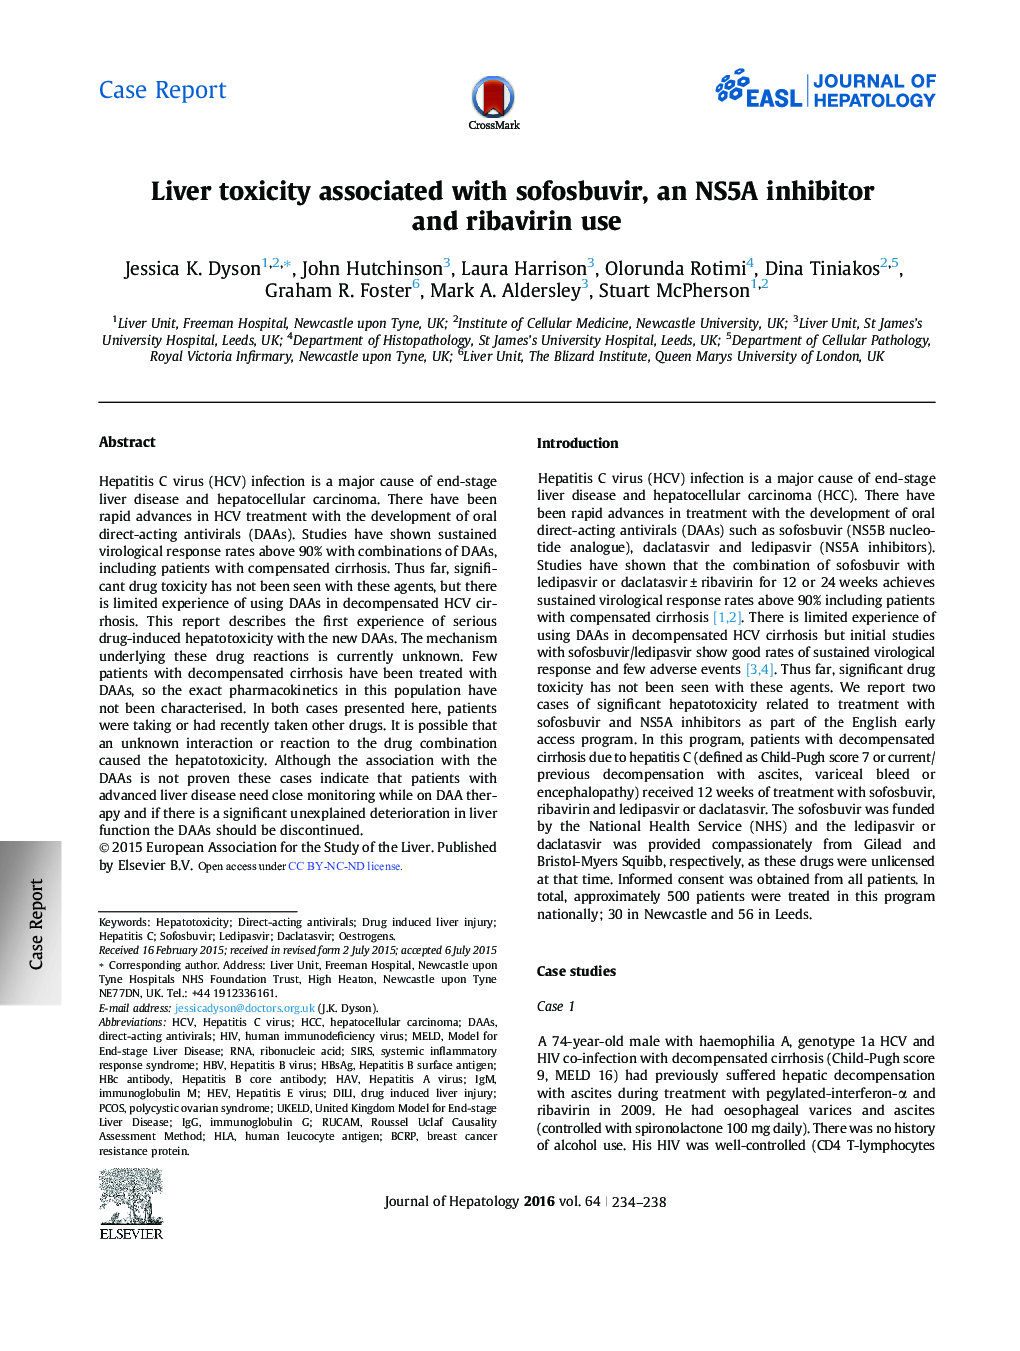 Case ReportLiver toxicity associated with sofosbuvir, an NS5A inhibitor and ribavirin use